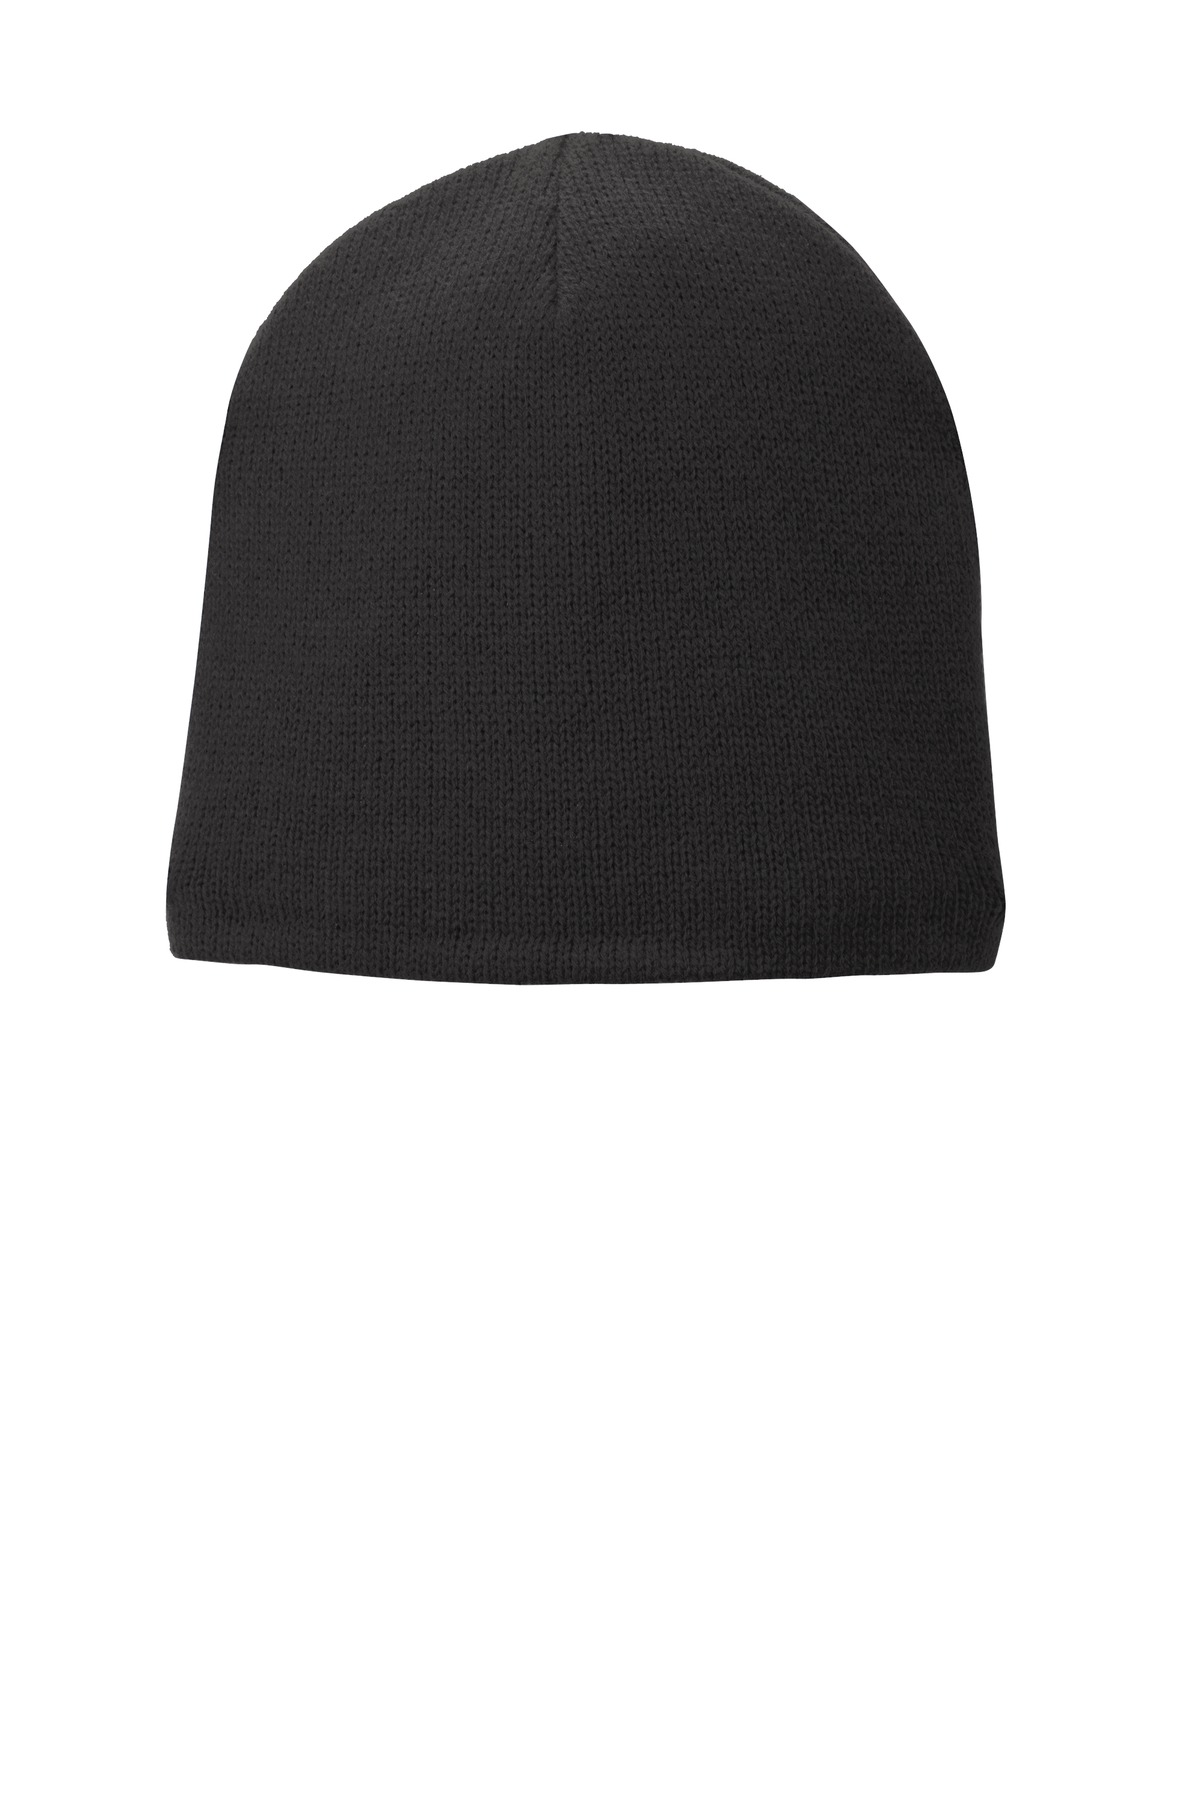 Port and Company Fleece-Lined Beanie Cap. CP91L